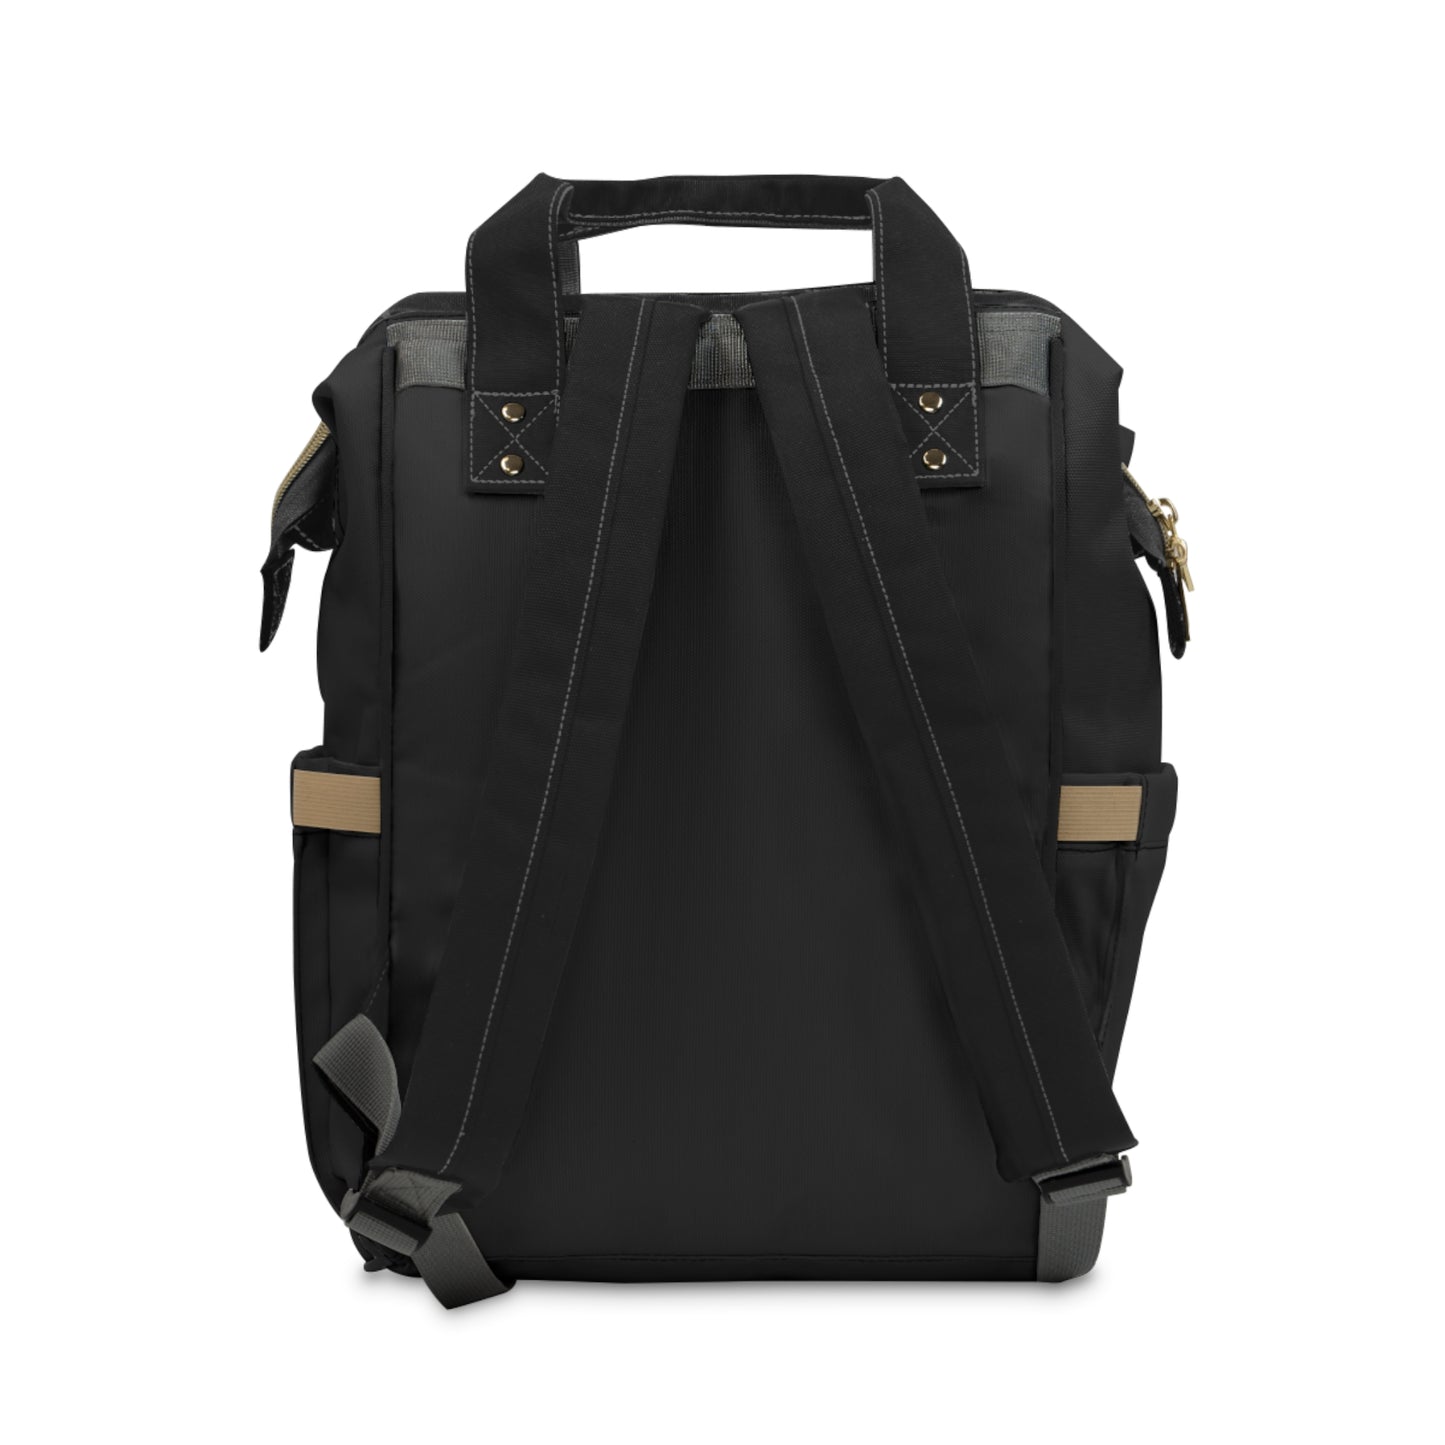 The Venture Backpack